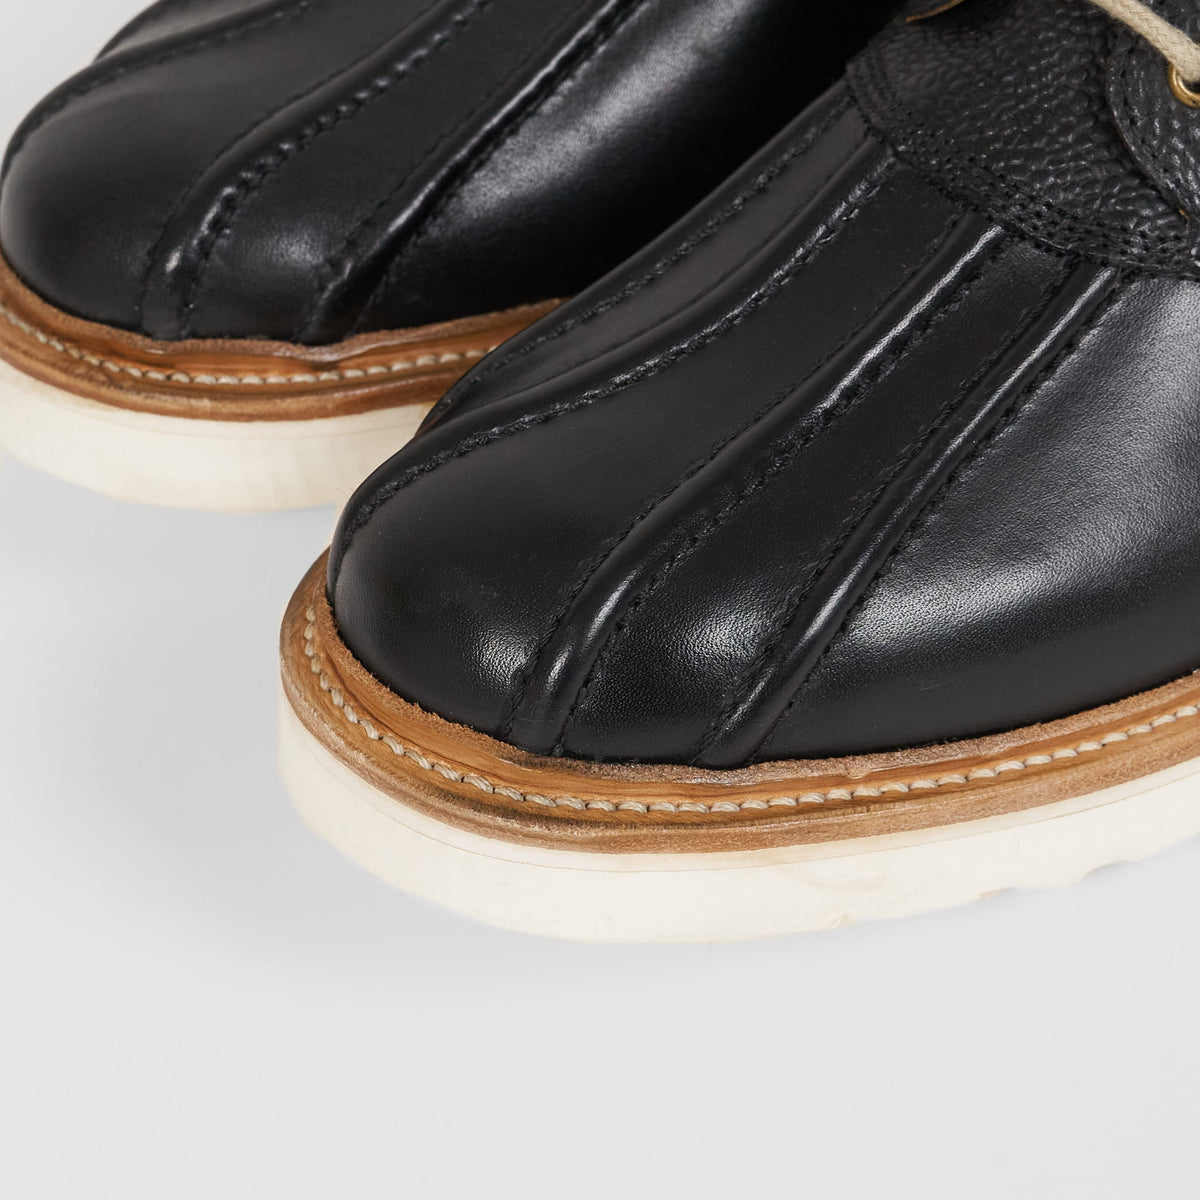 Grenson Leather Duck Boots